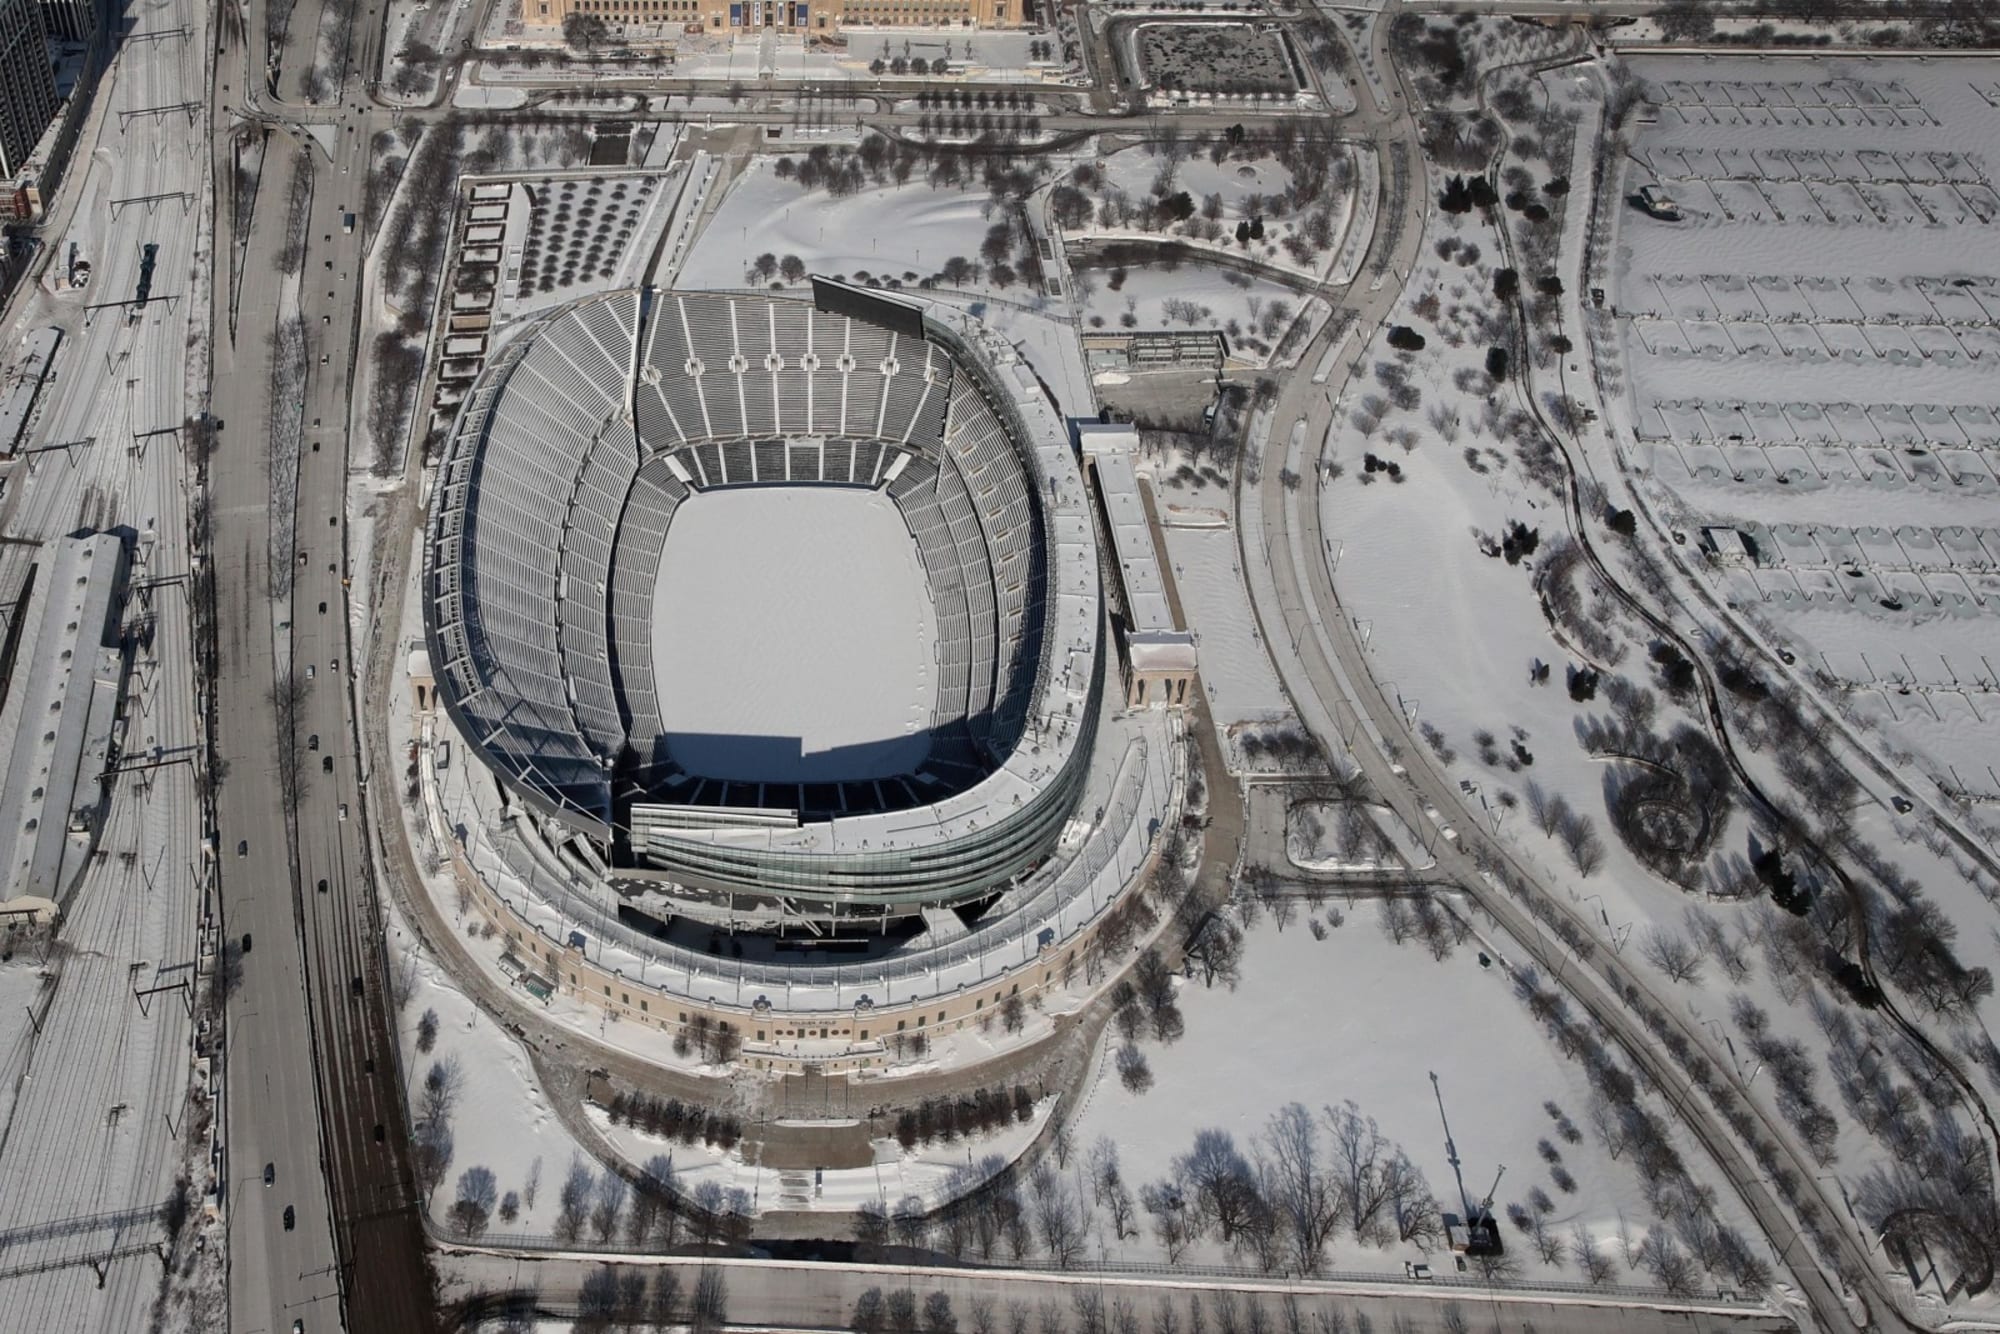 Chicago Bears Not All Fans Would Be Happy With A New Stadium